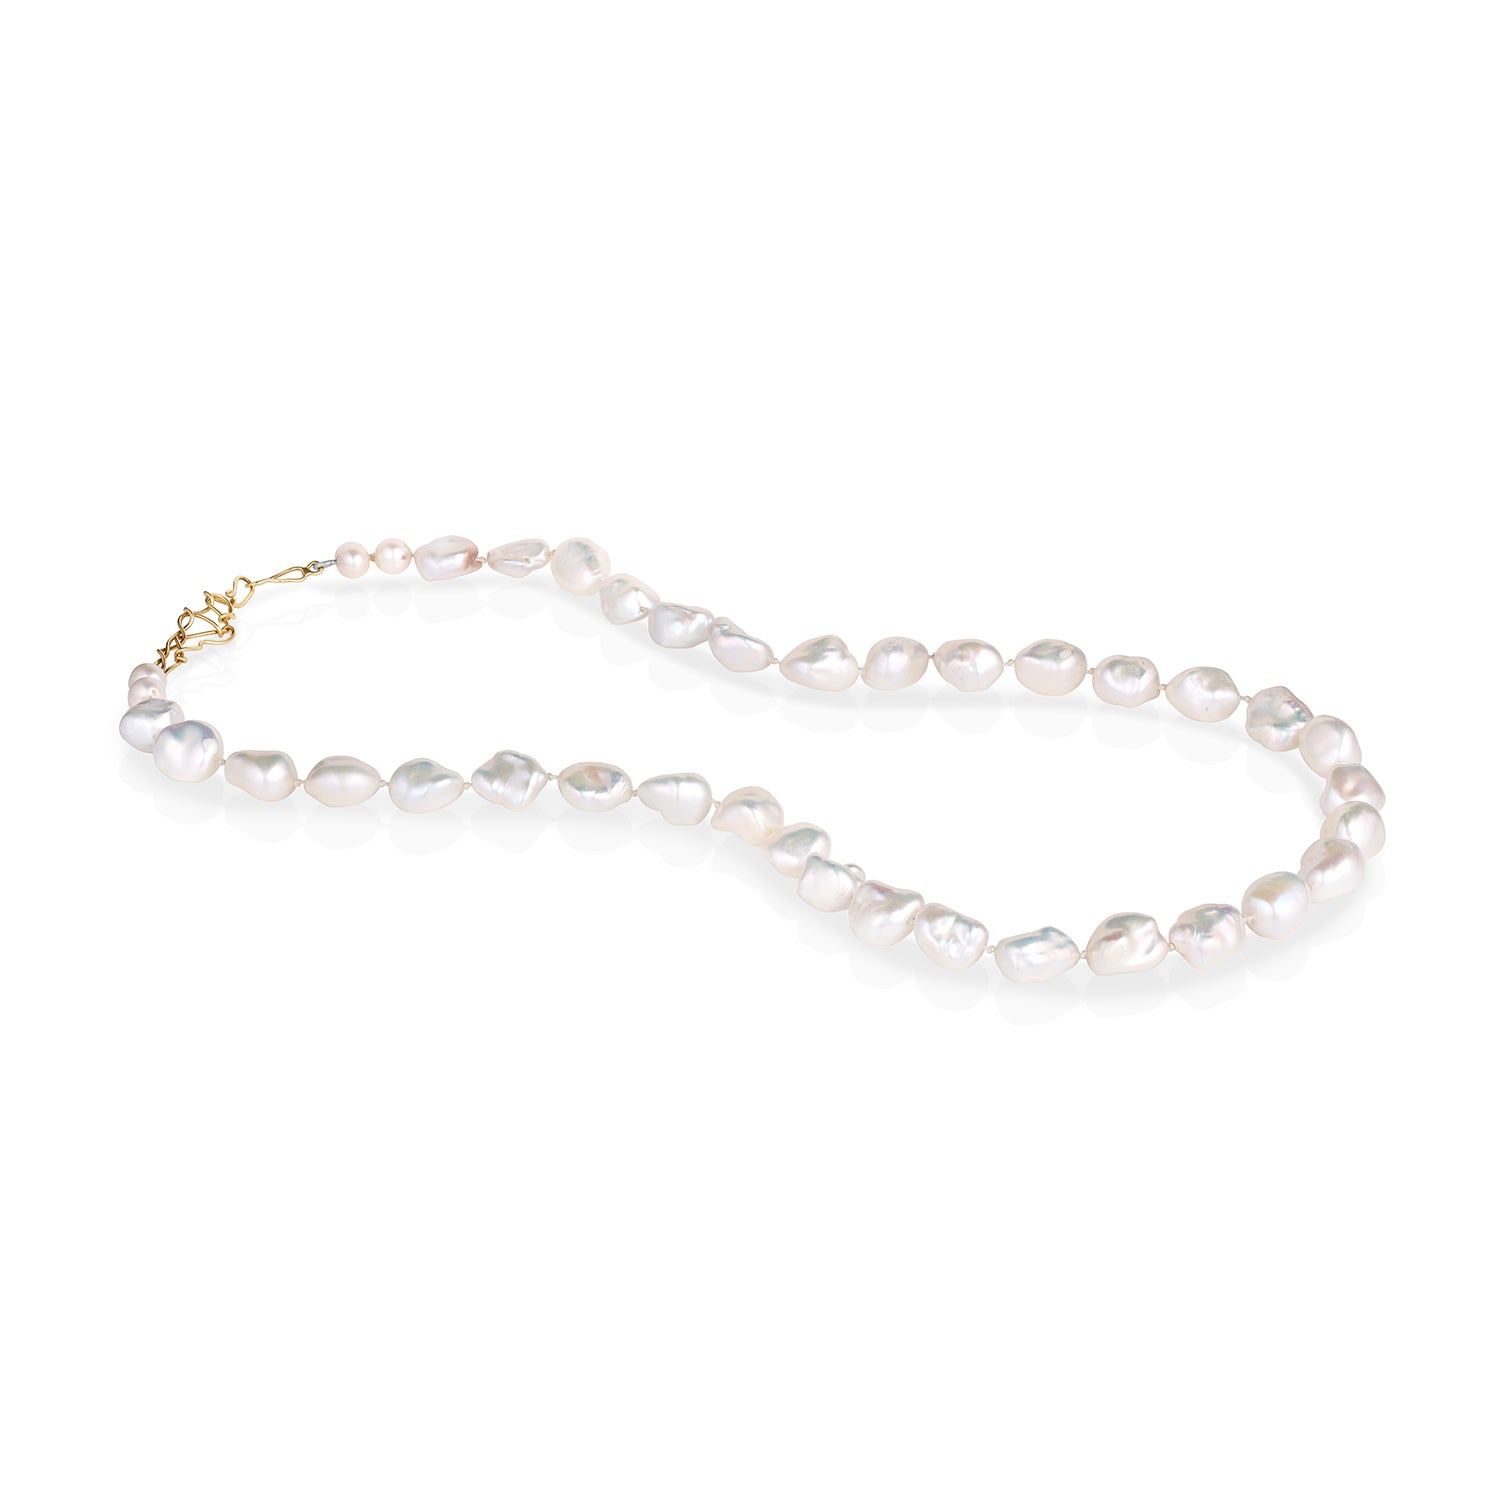 14K Freestyle clasp on unique Nugget Pearls